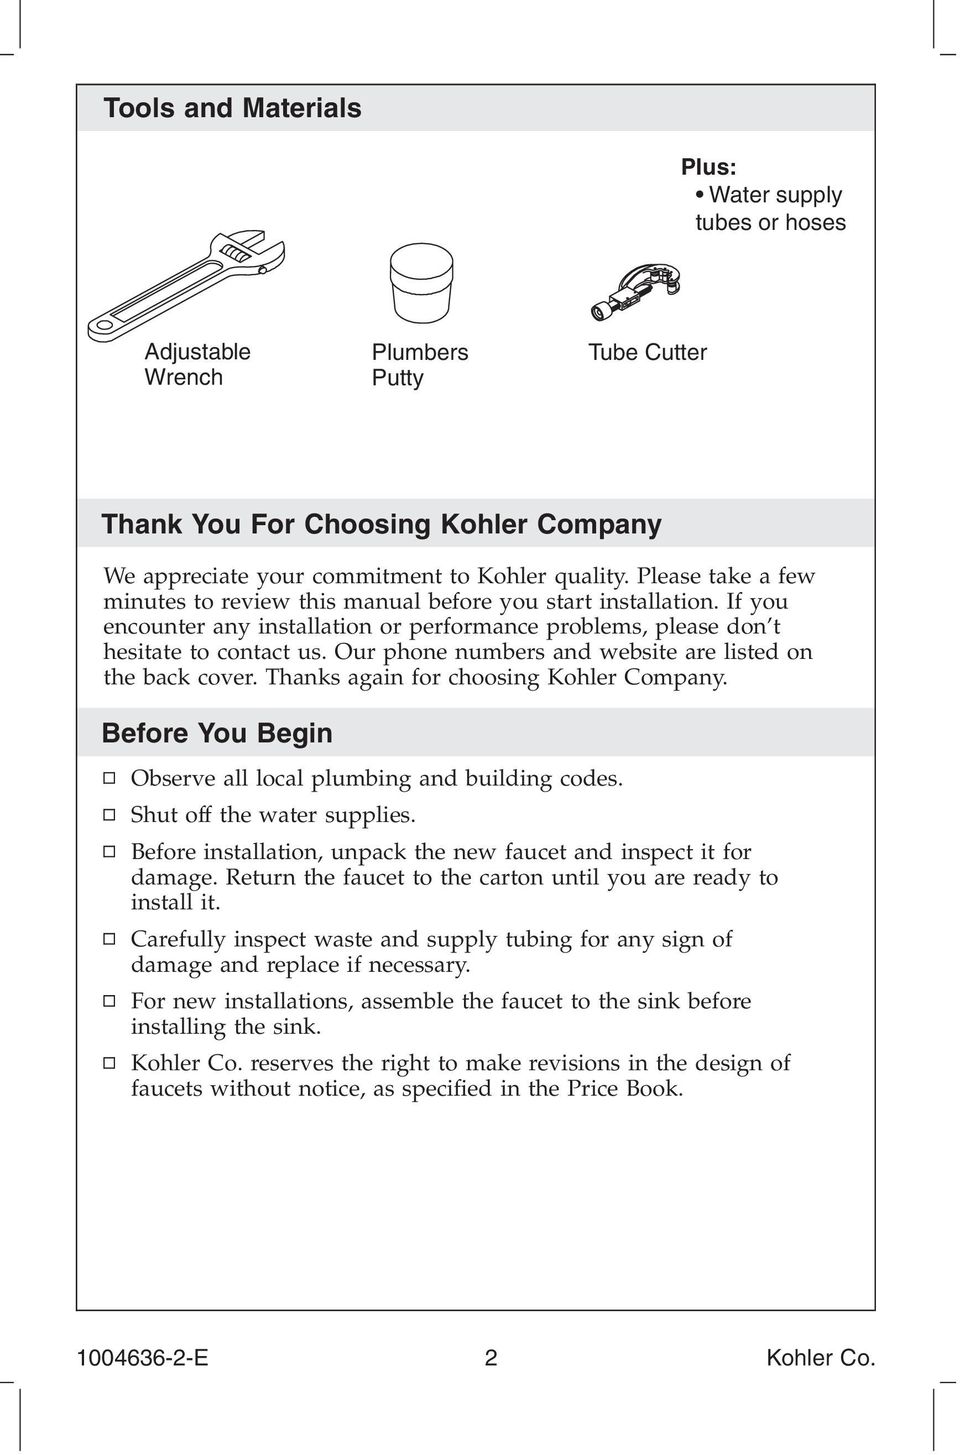 Our phone numbers and website are listed on the back cover. Thanks again for choosing Kohler Company. Before You Begin Observe all local plumbing and building codes. Shut off the water supplies.